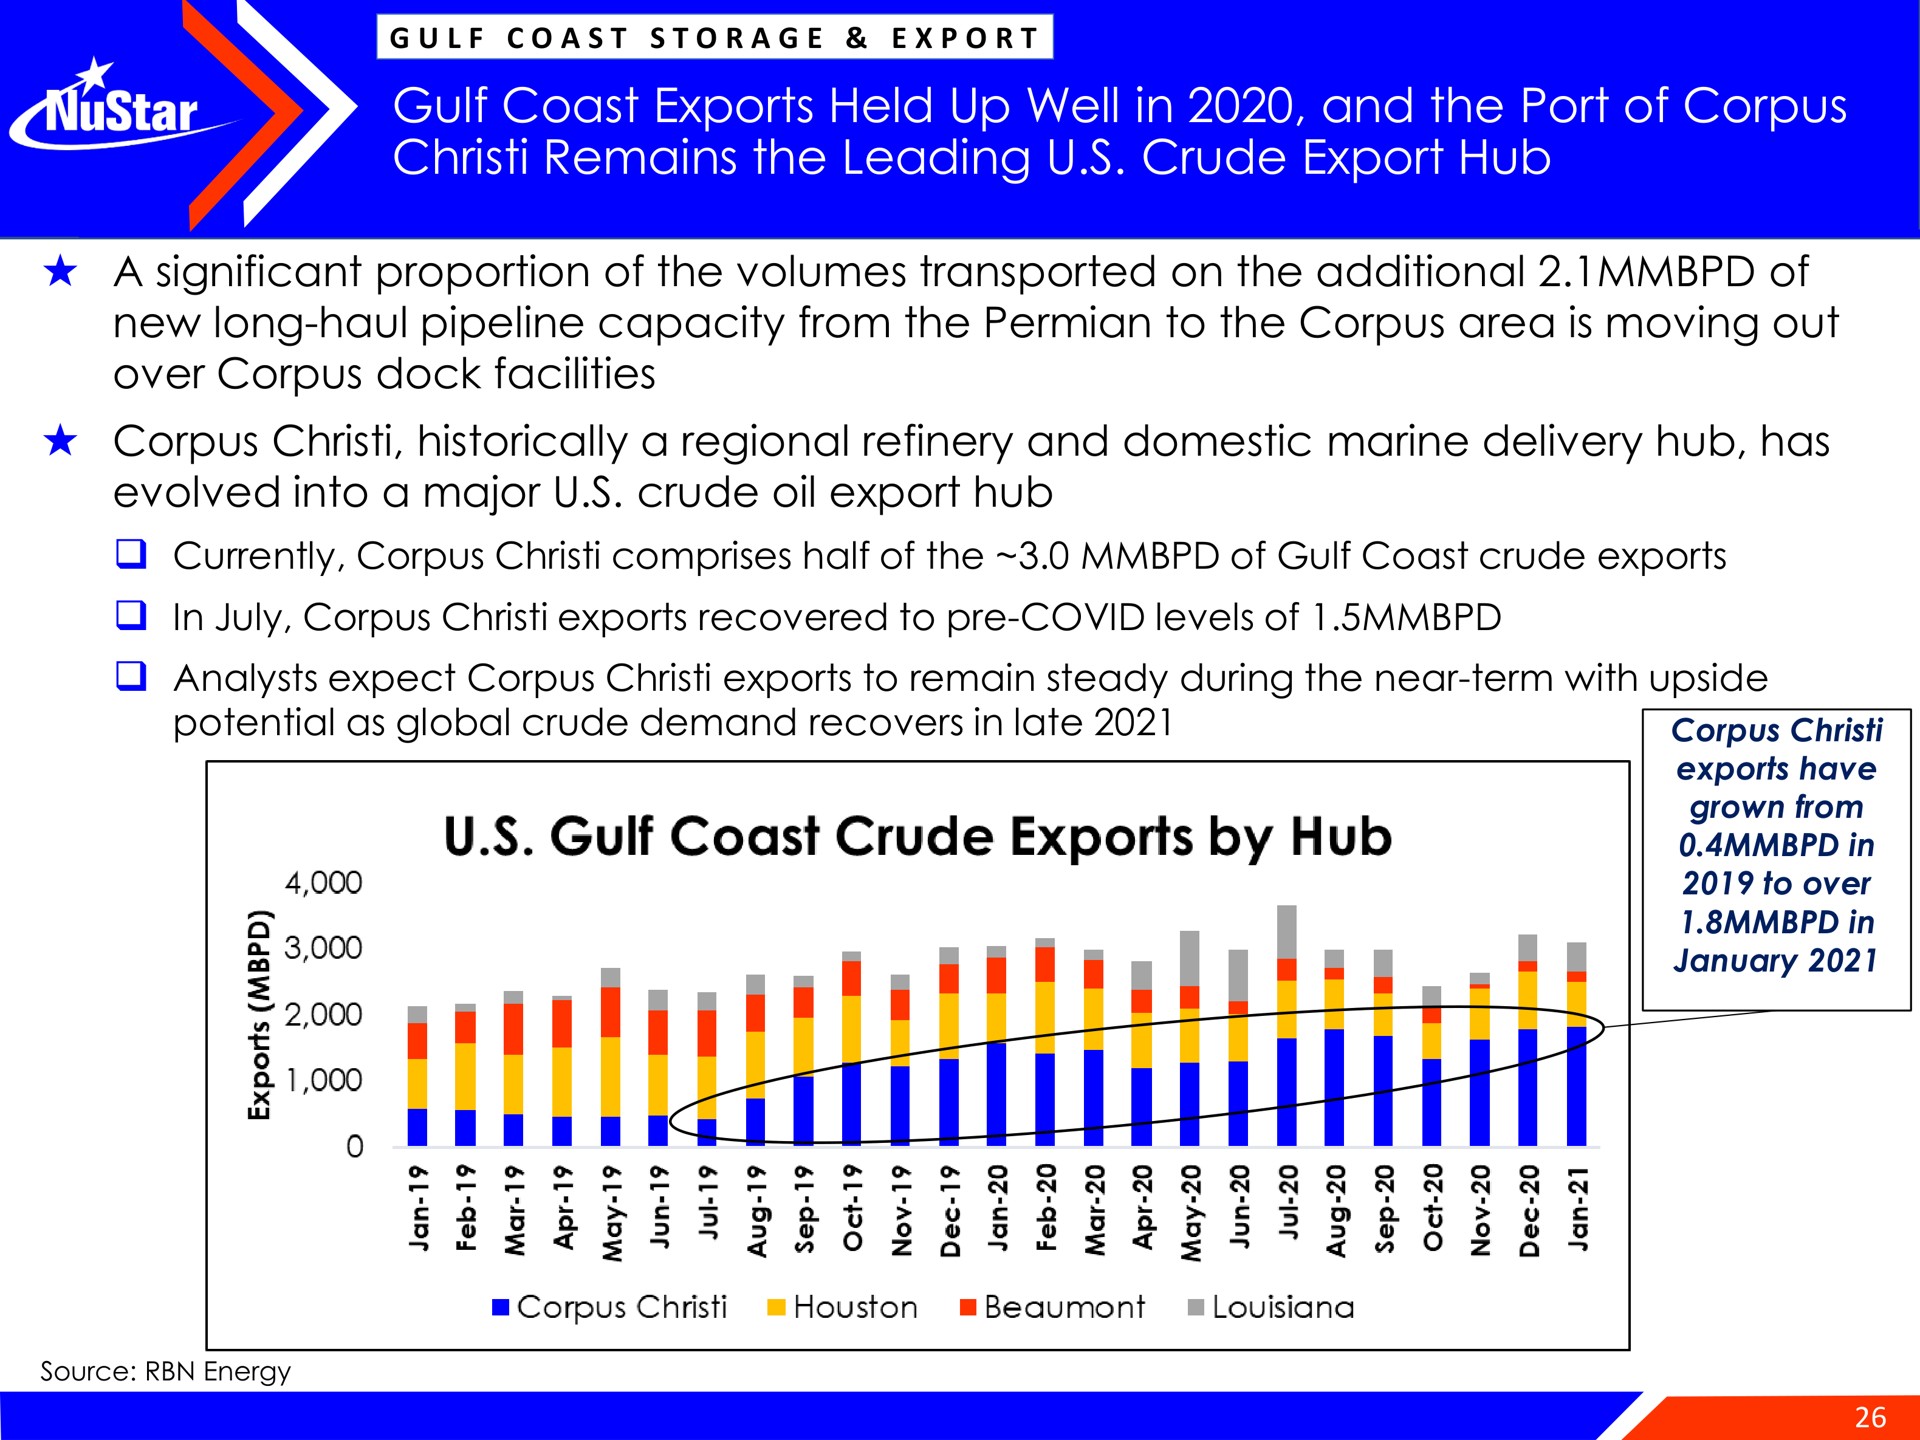 gulf coast exports held up well in and the port of corpus remains the leading crude export hub by | NuStar Energy